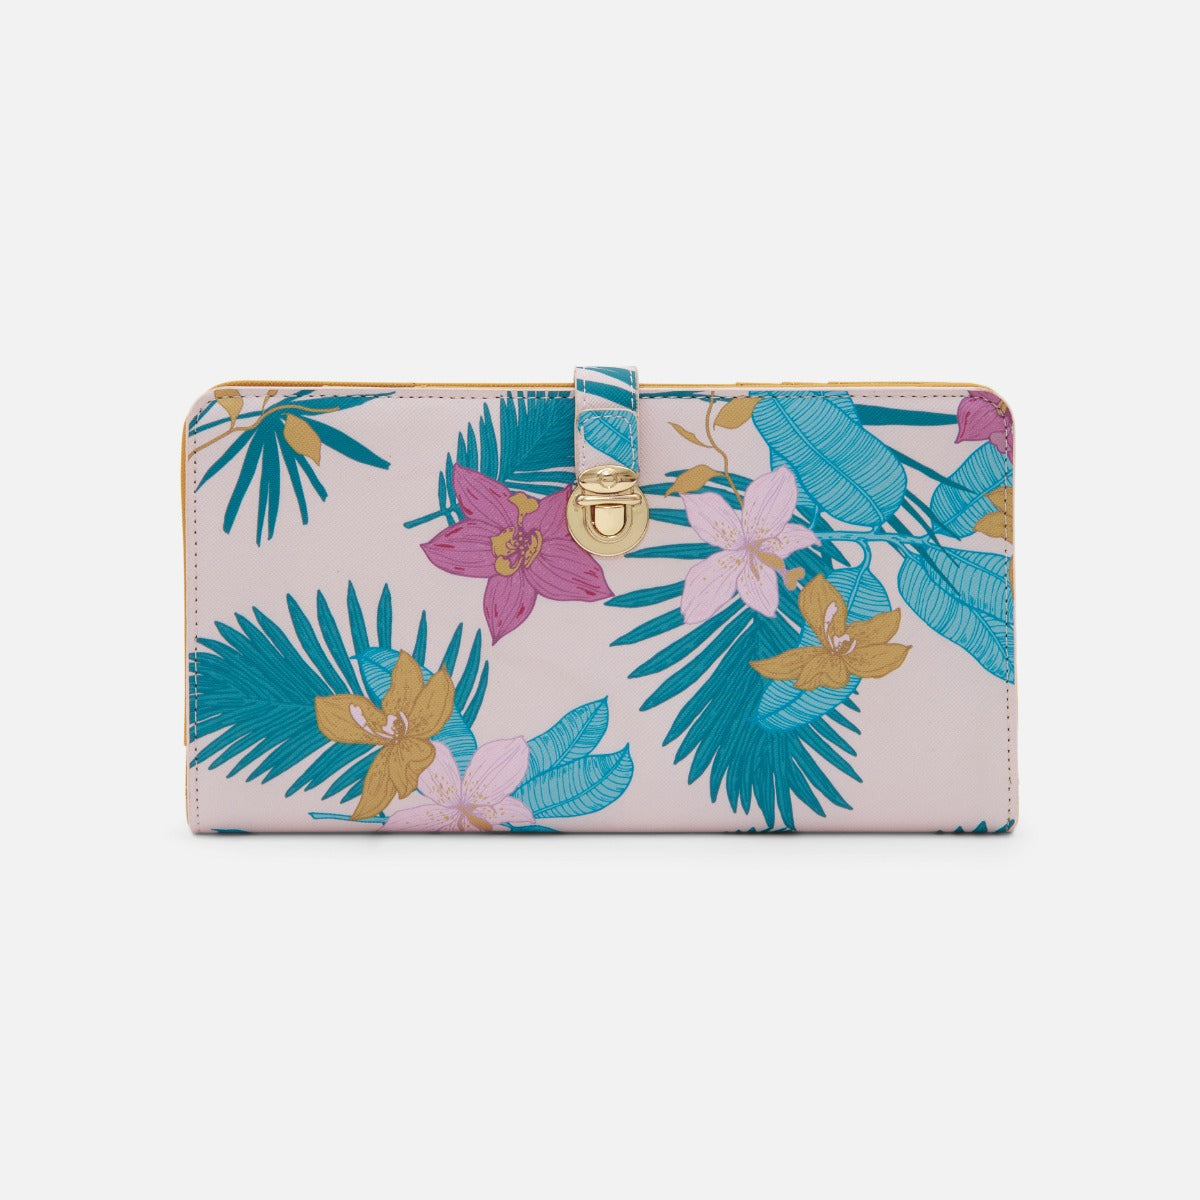 Passport case with tropical pattern